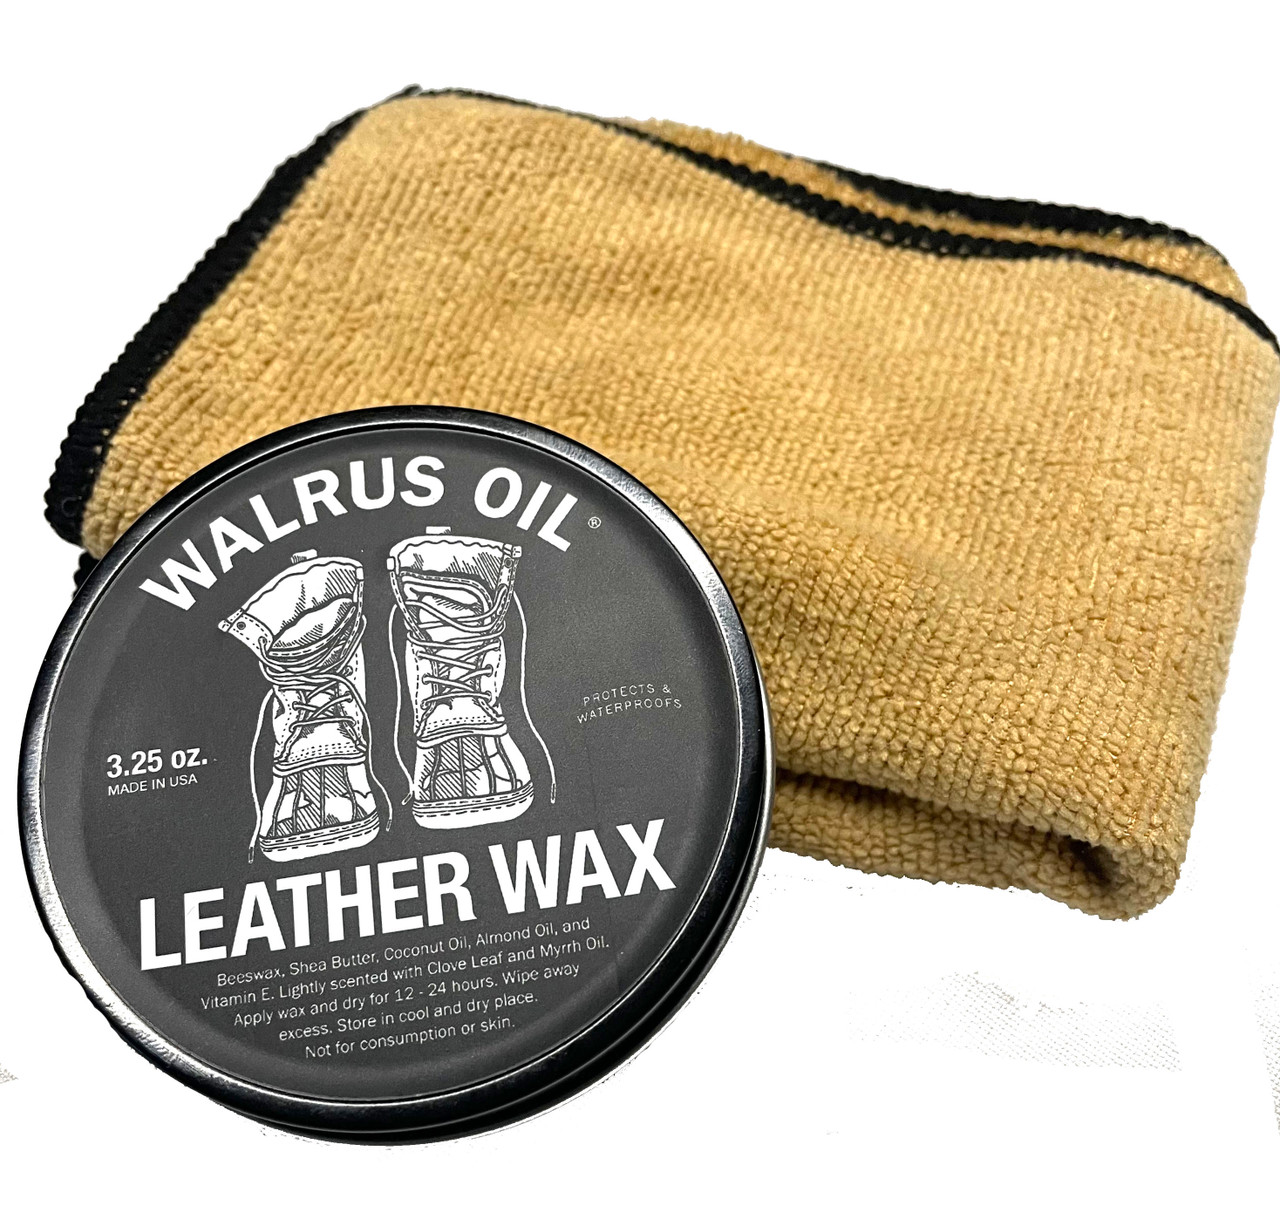 Walrus Oil Leather Wax and application cloth